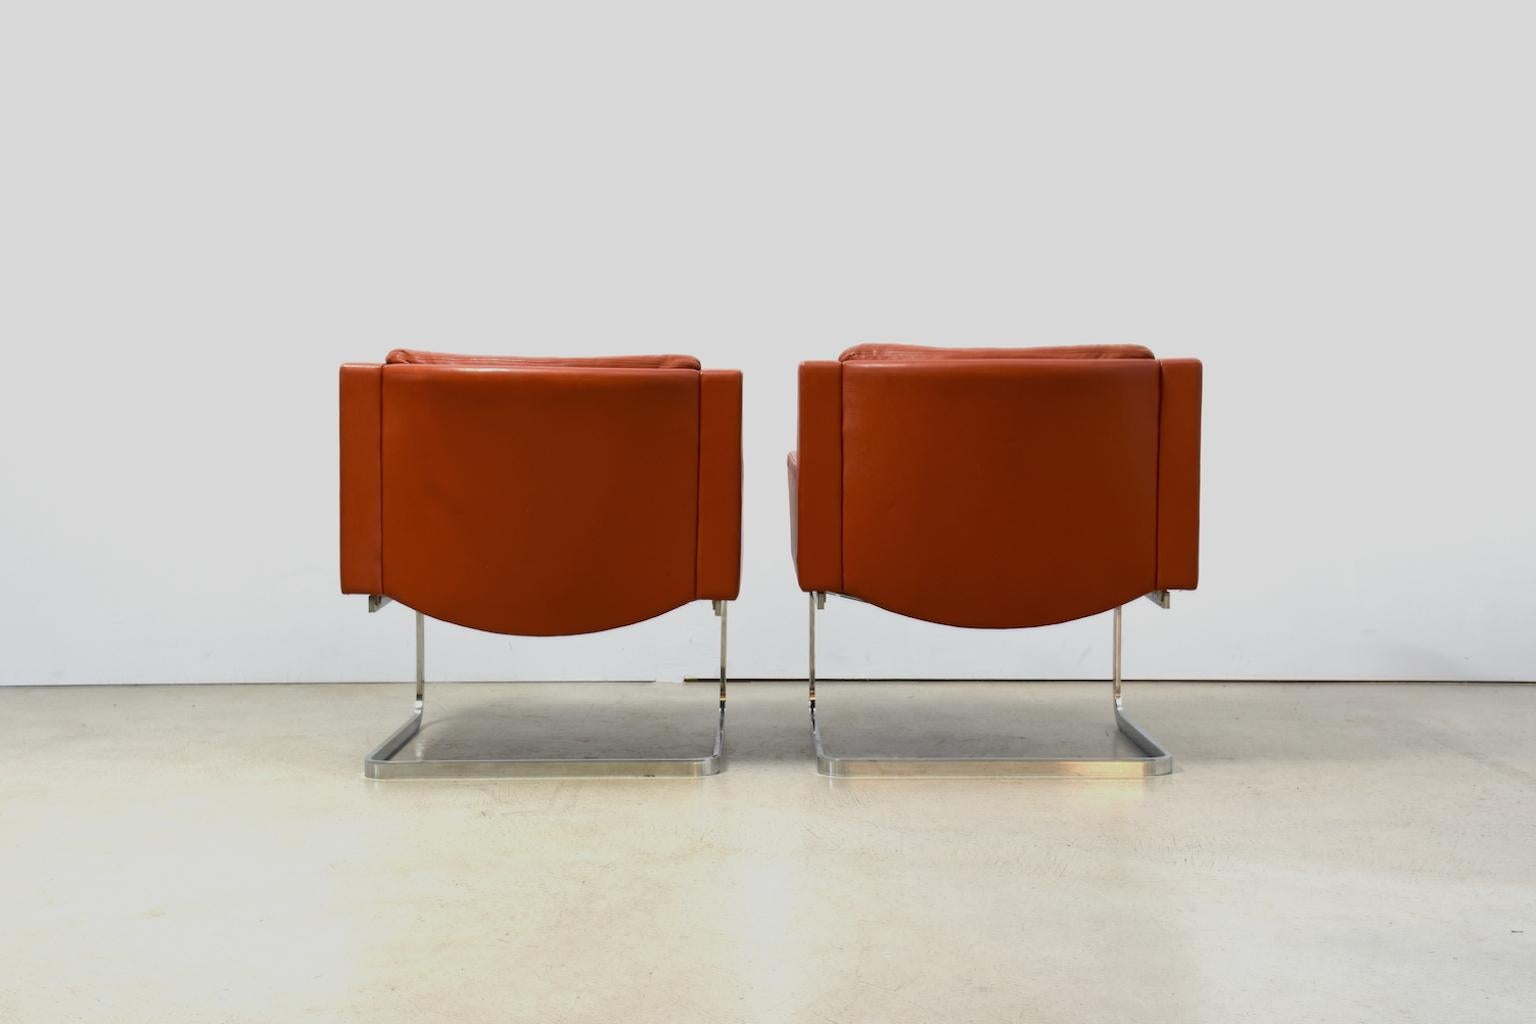 A pair of executive lounge chairs by Swiss architect and designer Robert Haussmann. Cantilevered construction with frame in chromed flat steel, body with wooden frame and covers in light reddish brown leather, leather cushions on the underside with